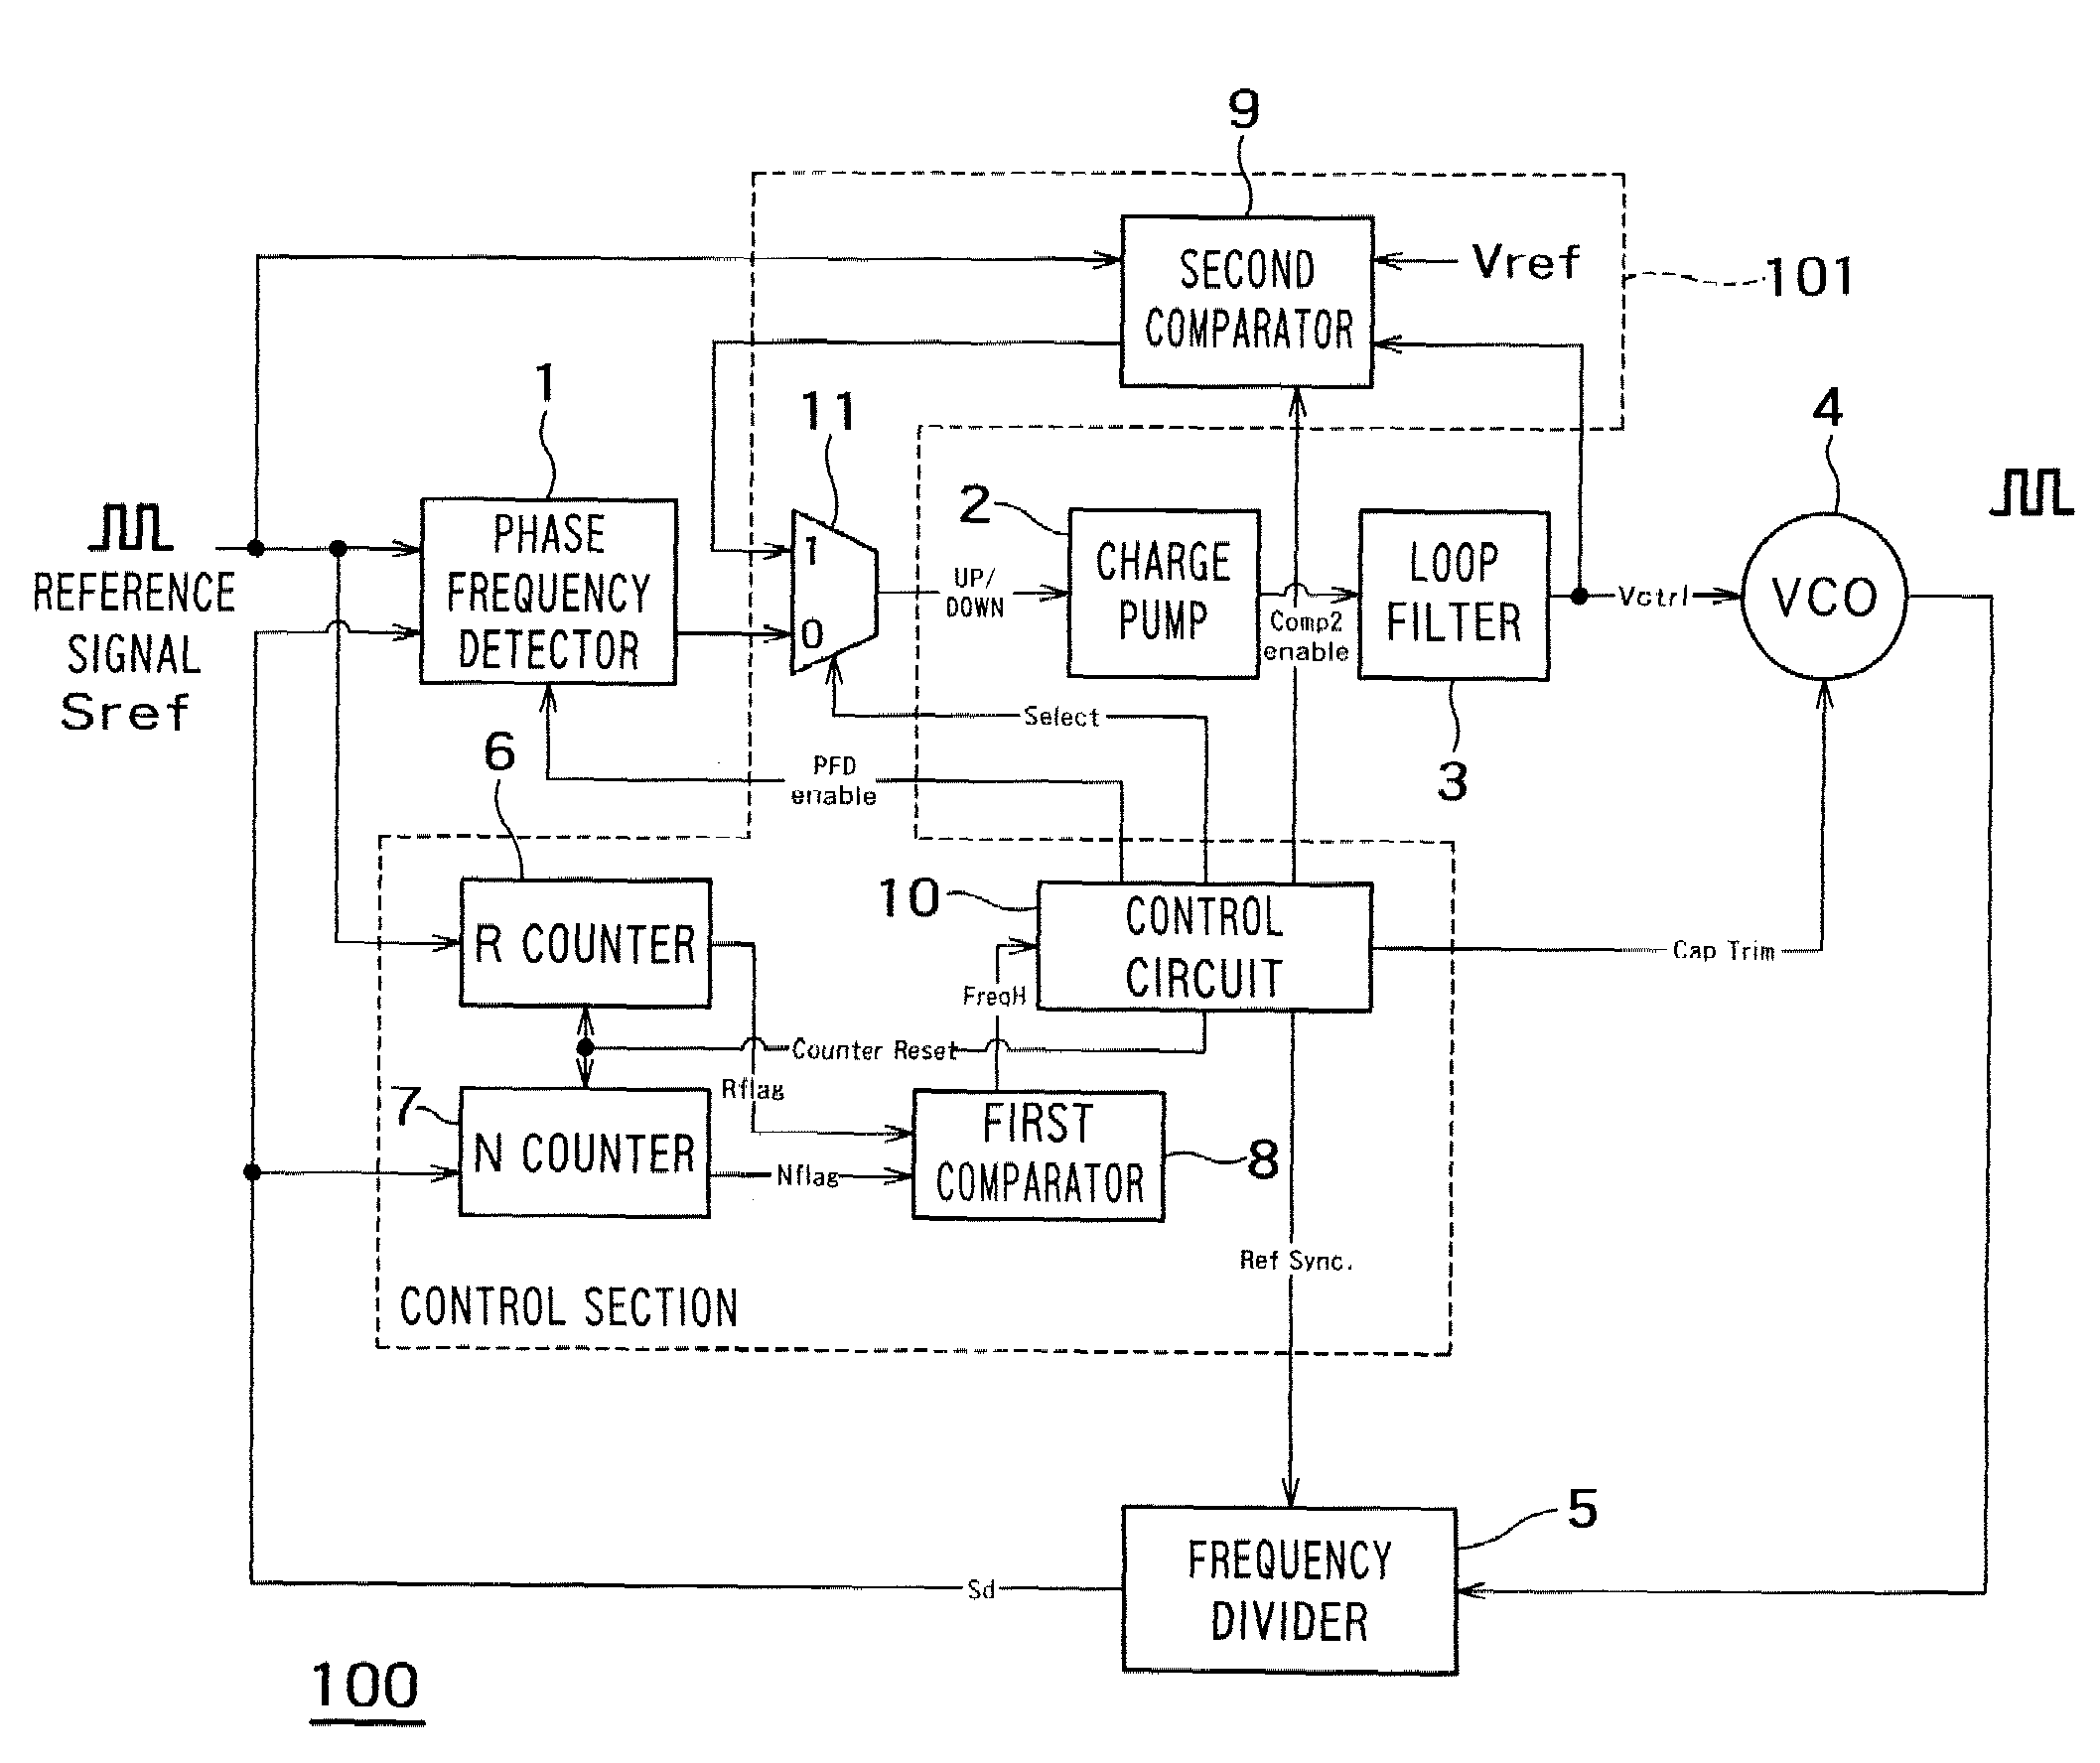 Oscillator controller incorporating a voltage-controlled oscillator that outputs an oscillation signal at a desired oscillation frequency